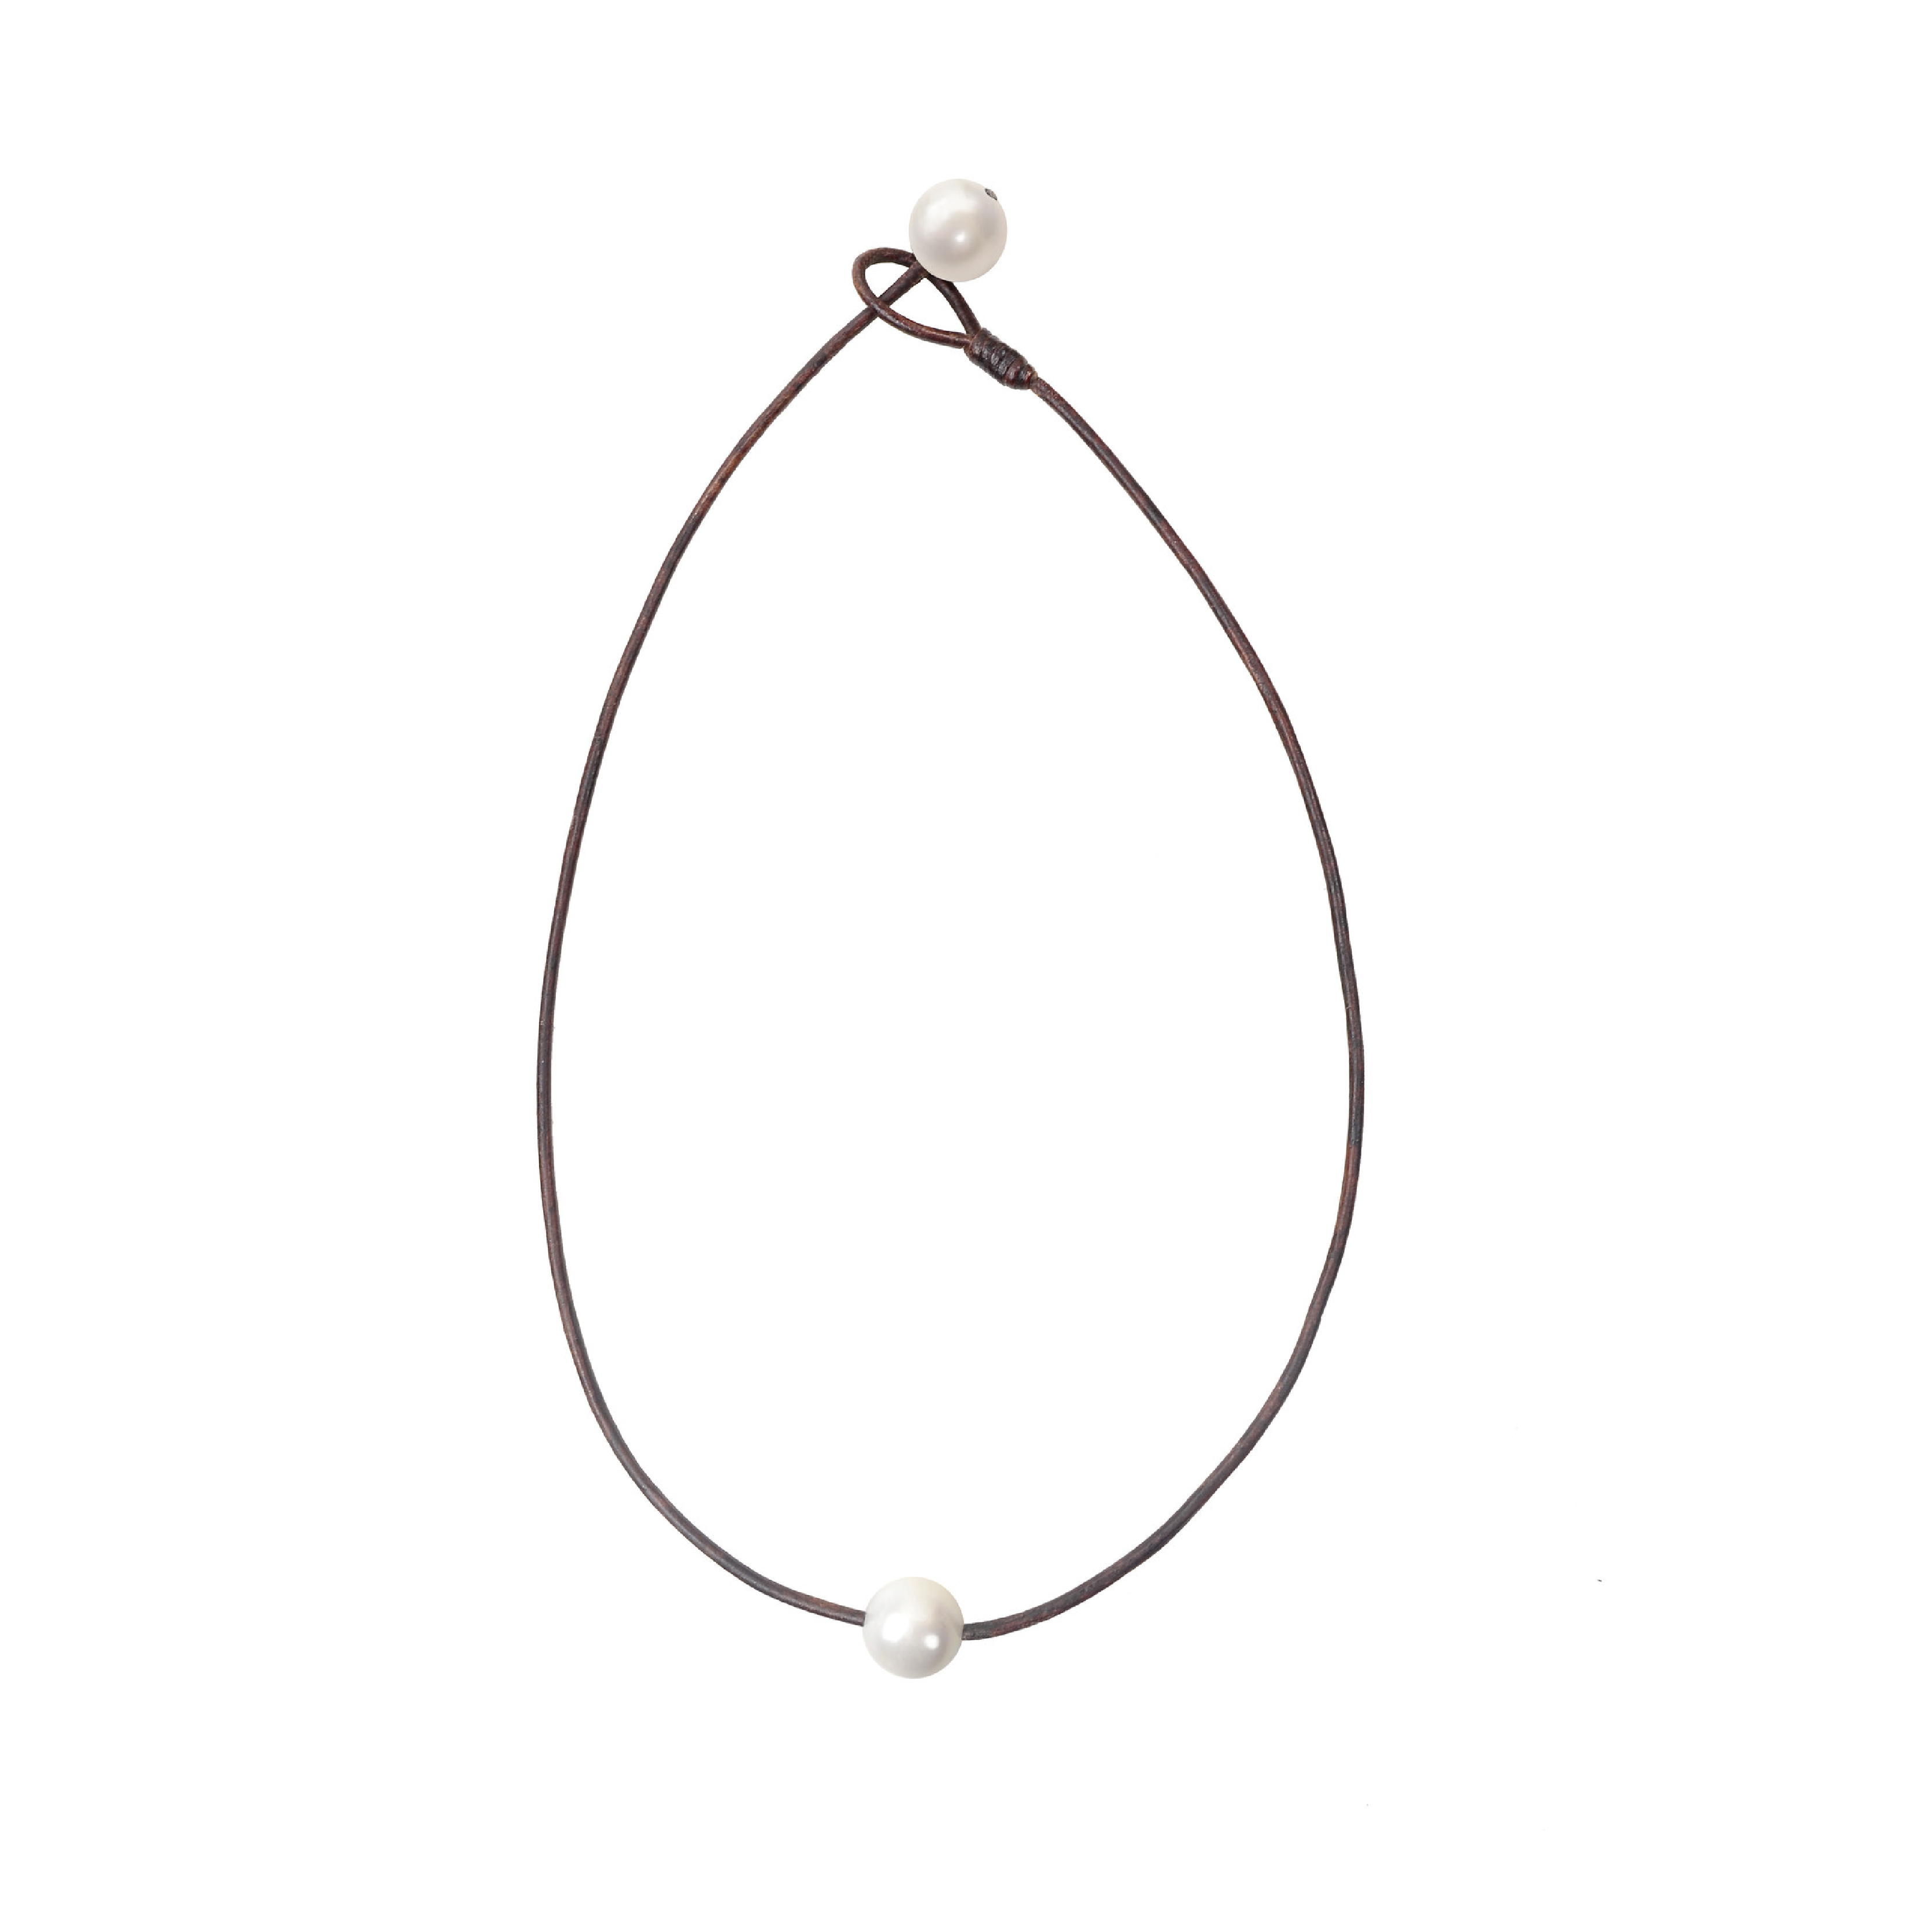 VINCENT PEACH SEAPLICITY NECKLACE WITH A LARGE FRESHWATER TISSUE PEARL ON PREMIUM LEATHER